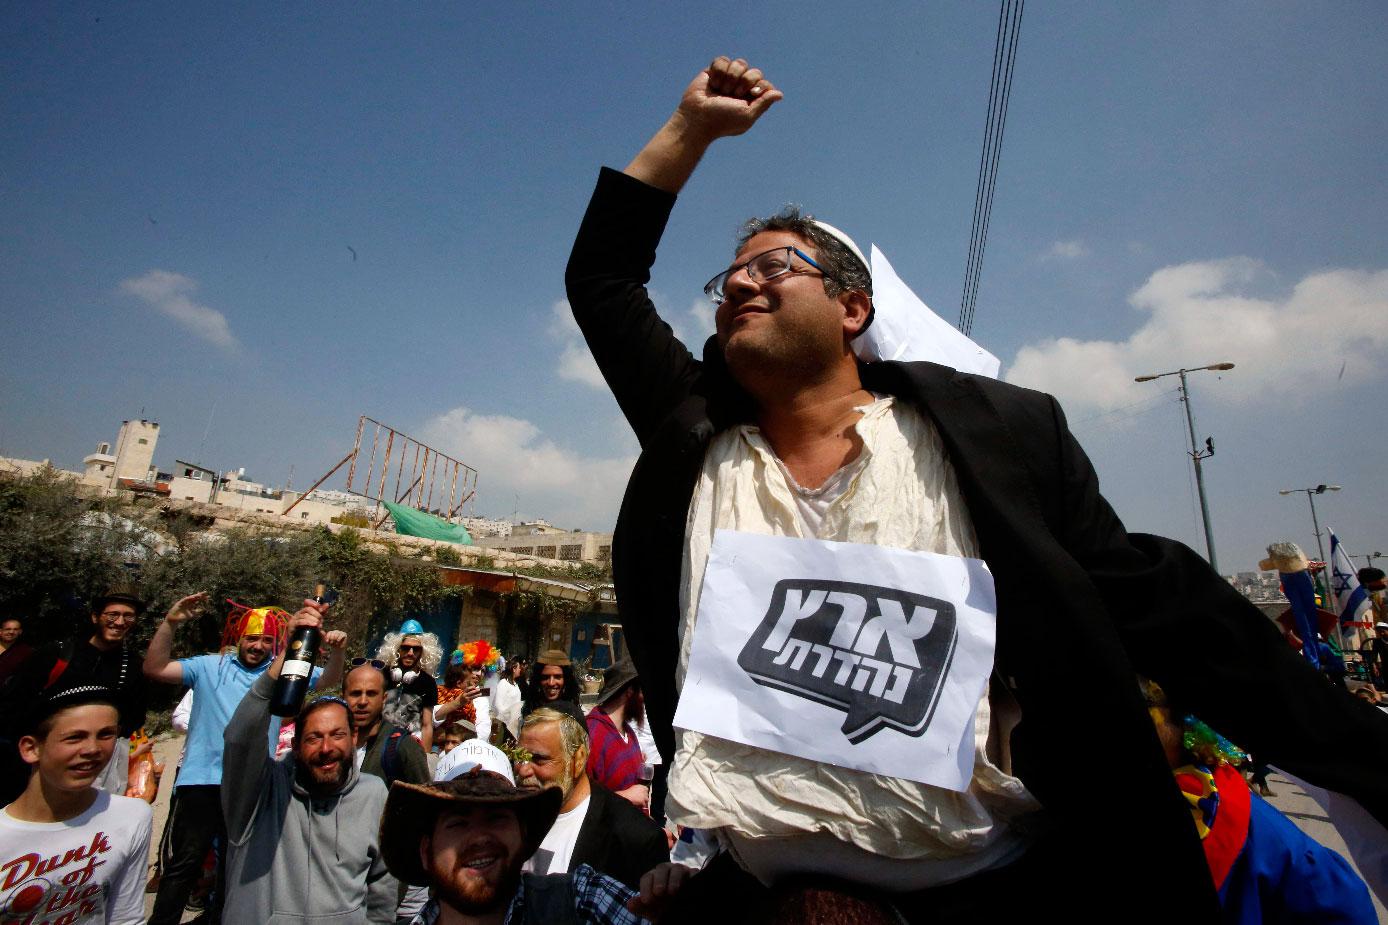 Jewish settlers carry Itamar Ben-Gvir, Jewish Power party leader, as they celebrate the Jewish Purim holiday at al-Shuhada street in the occupied Palestinian town of Hebron on March 21, 2019.